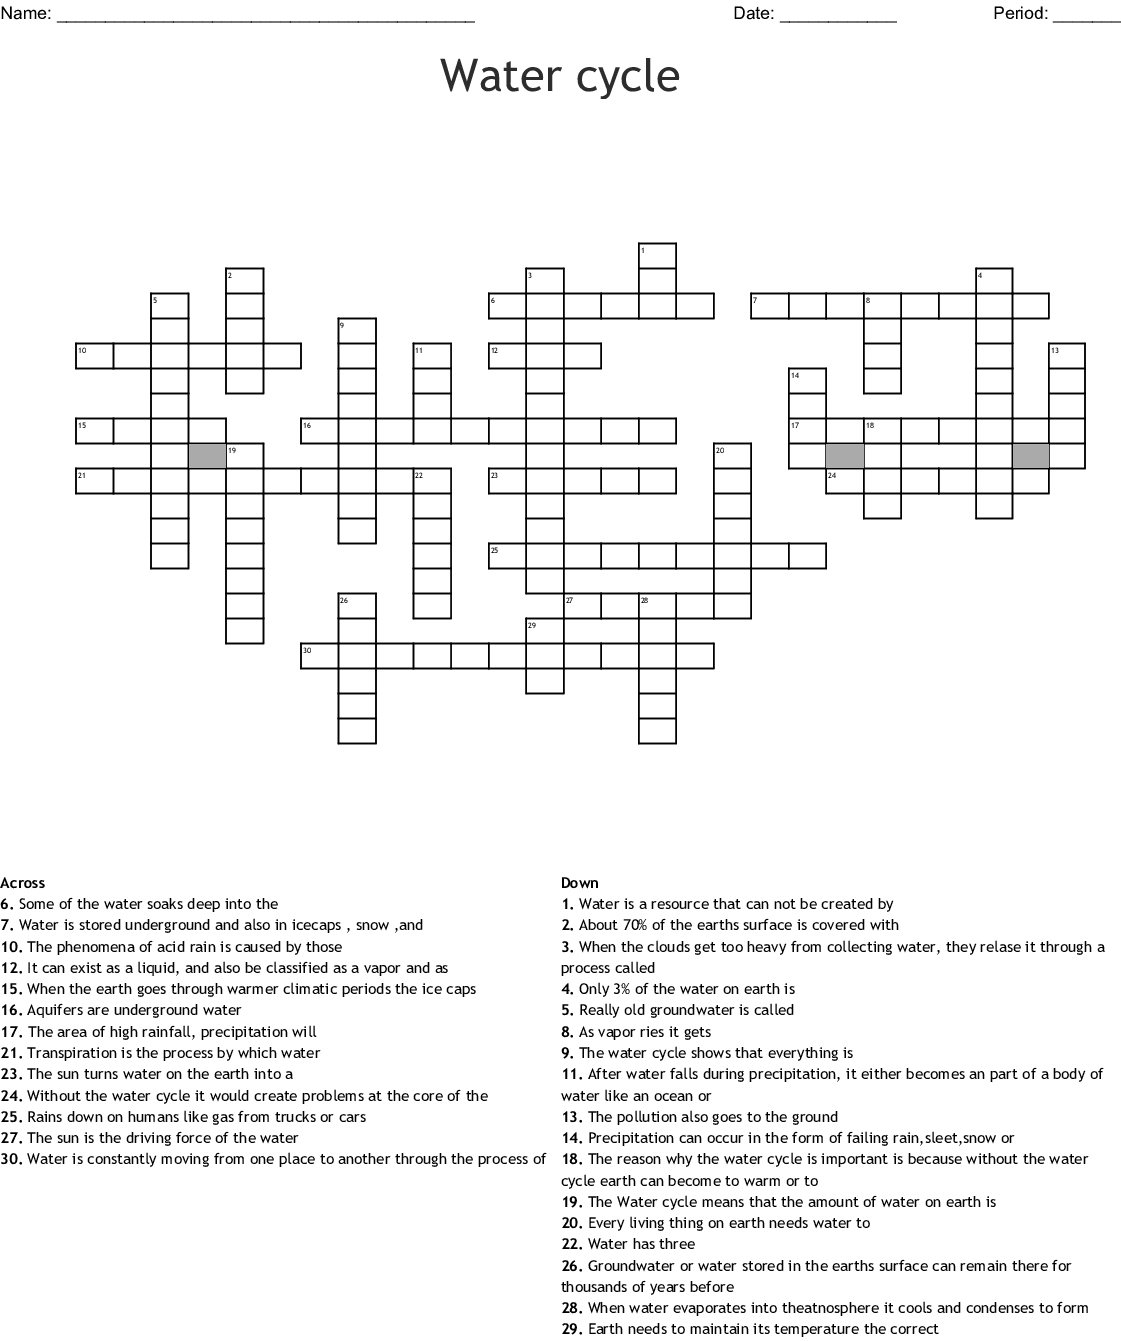 Water Cycle Crossword Puzzle Printable